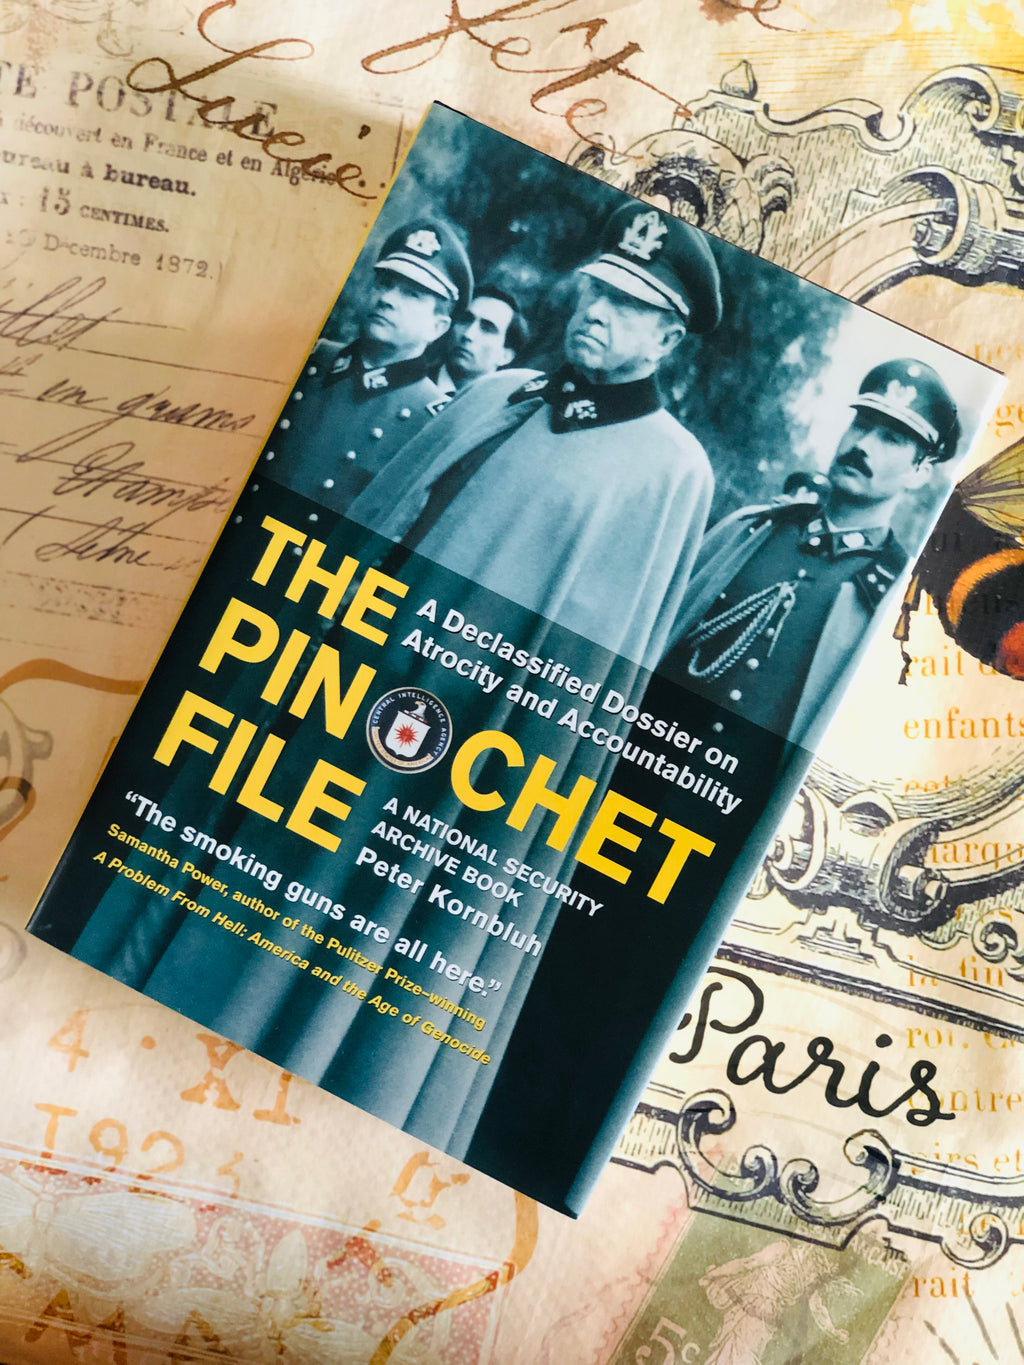 The Pinochet File: A National Security Archive Book- By Peter Kornbluh